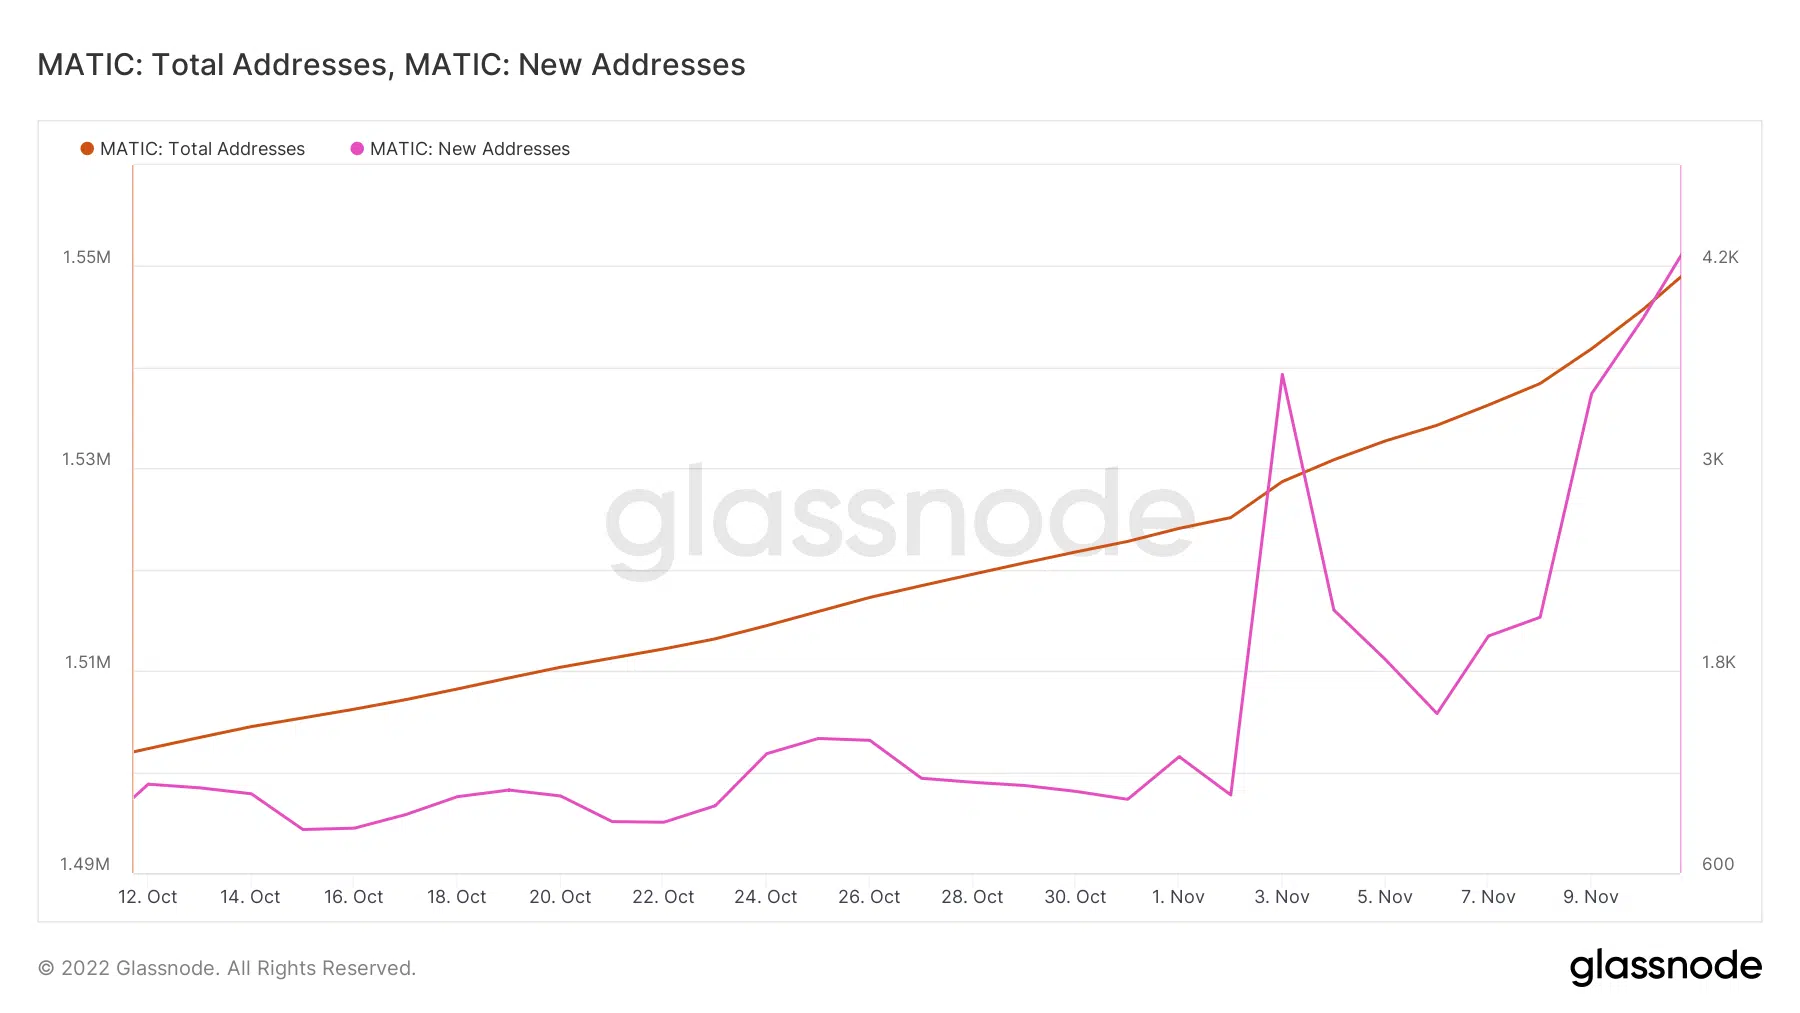 MATIC growth based on addresses